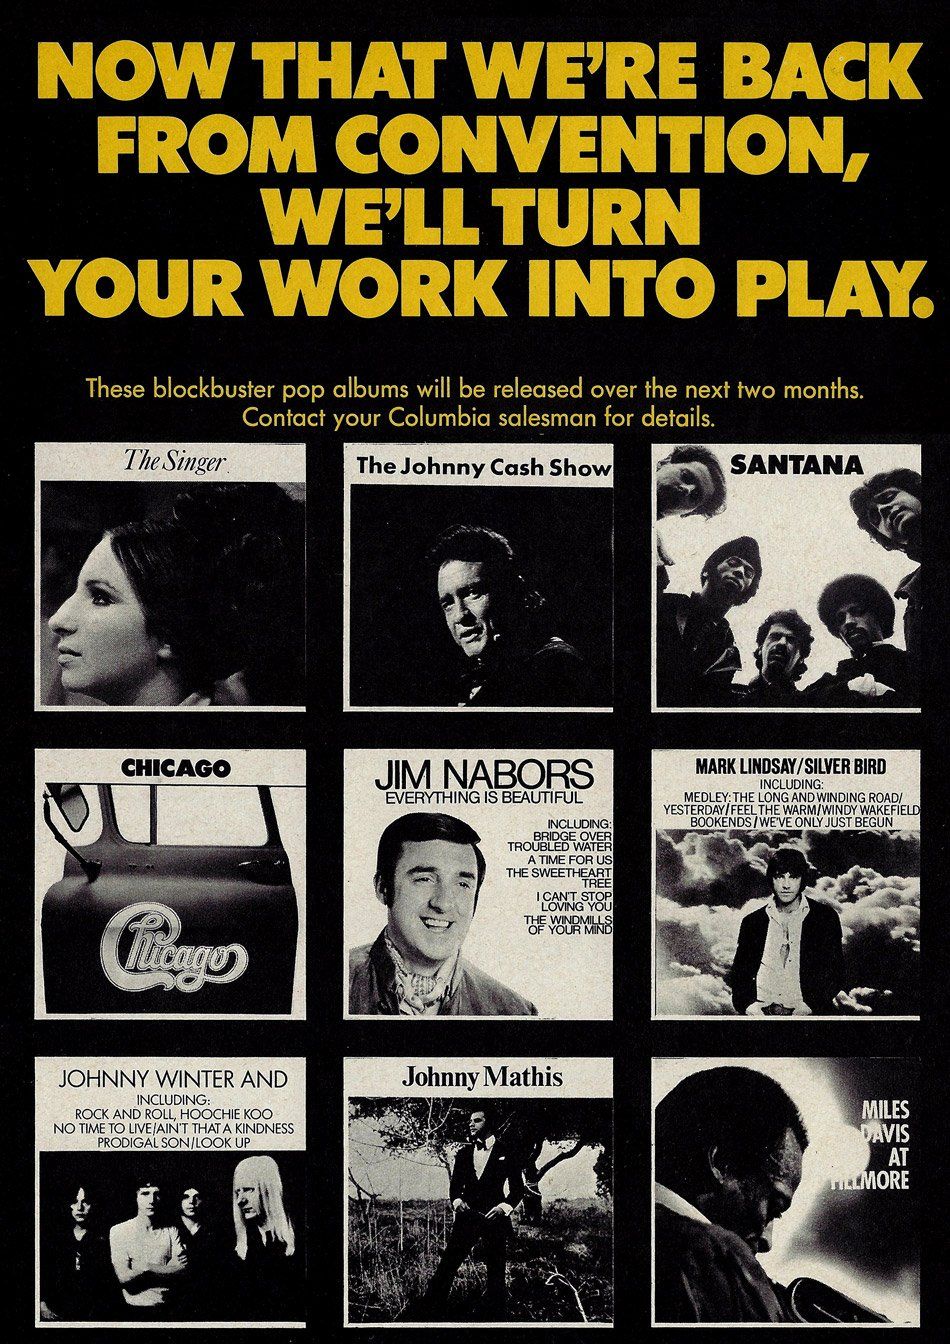 Columbia Records ad that mentions Streisand's album THE SINGER.